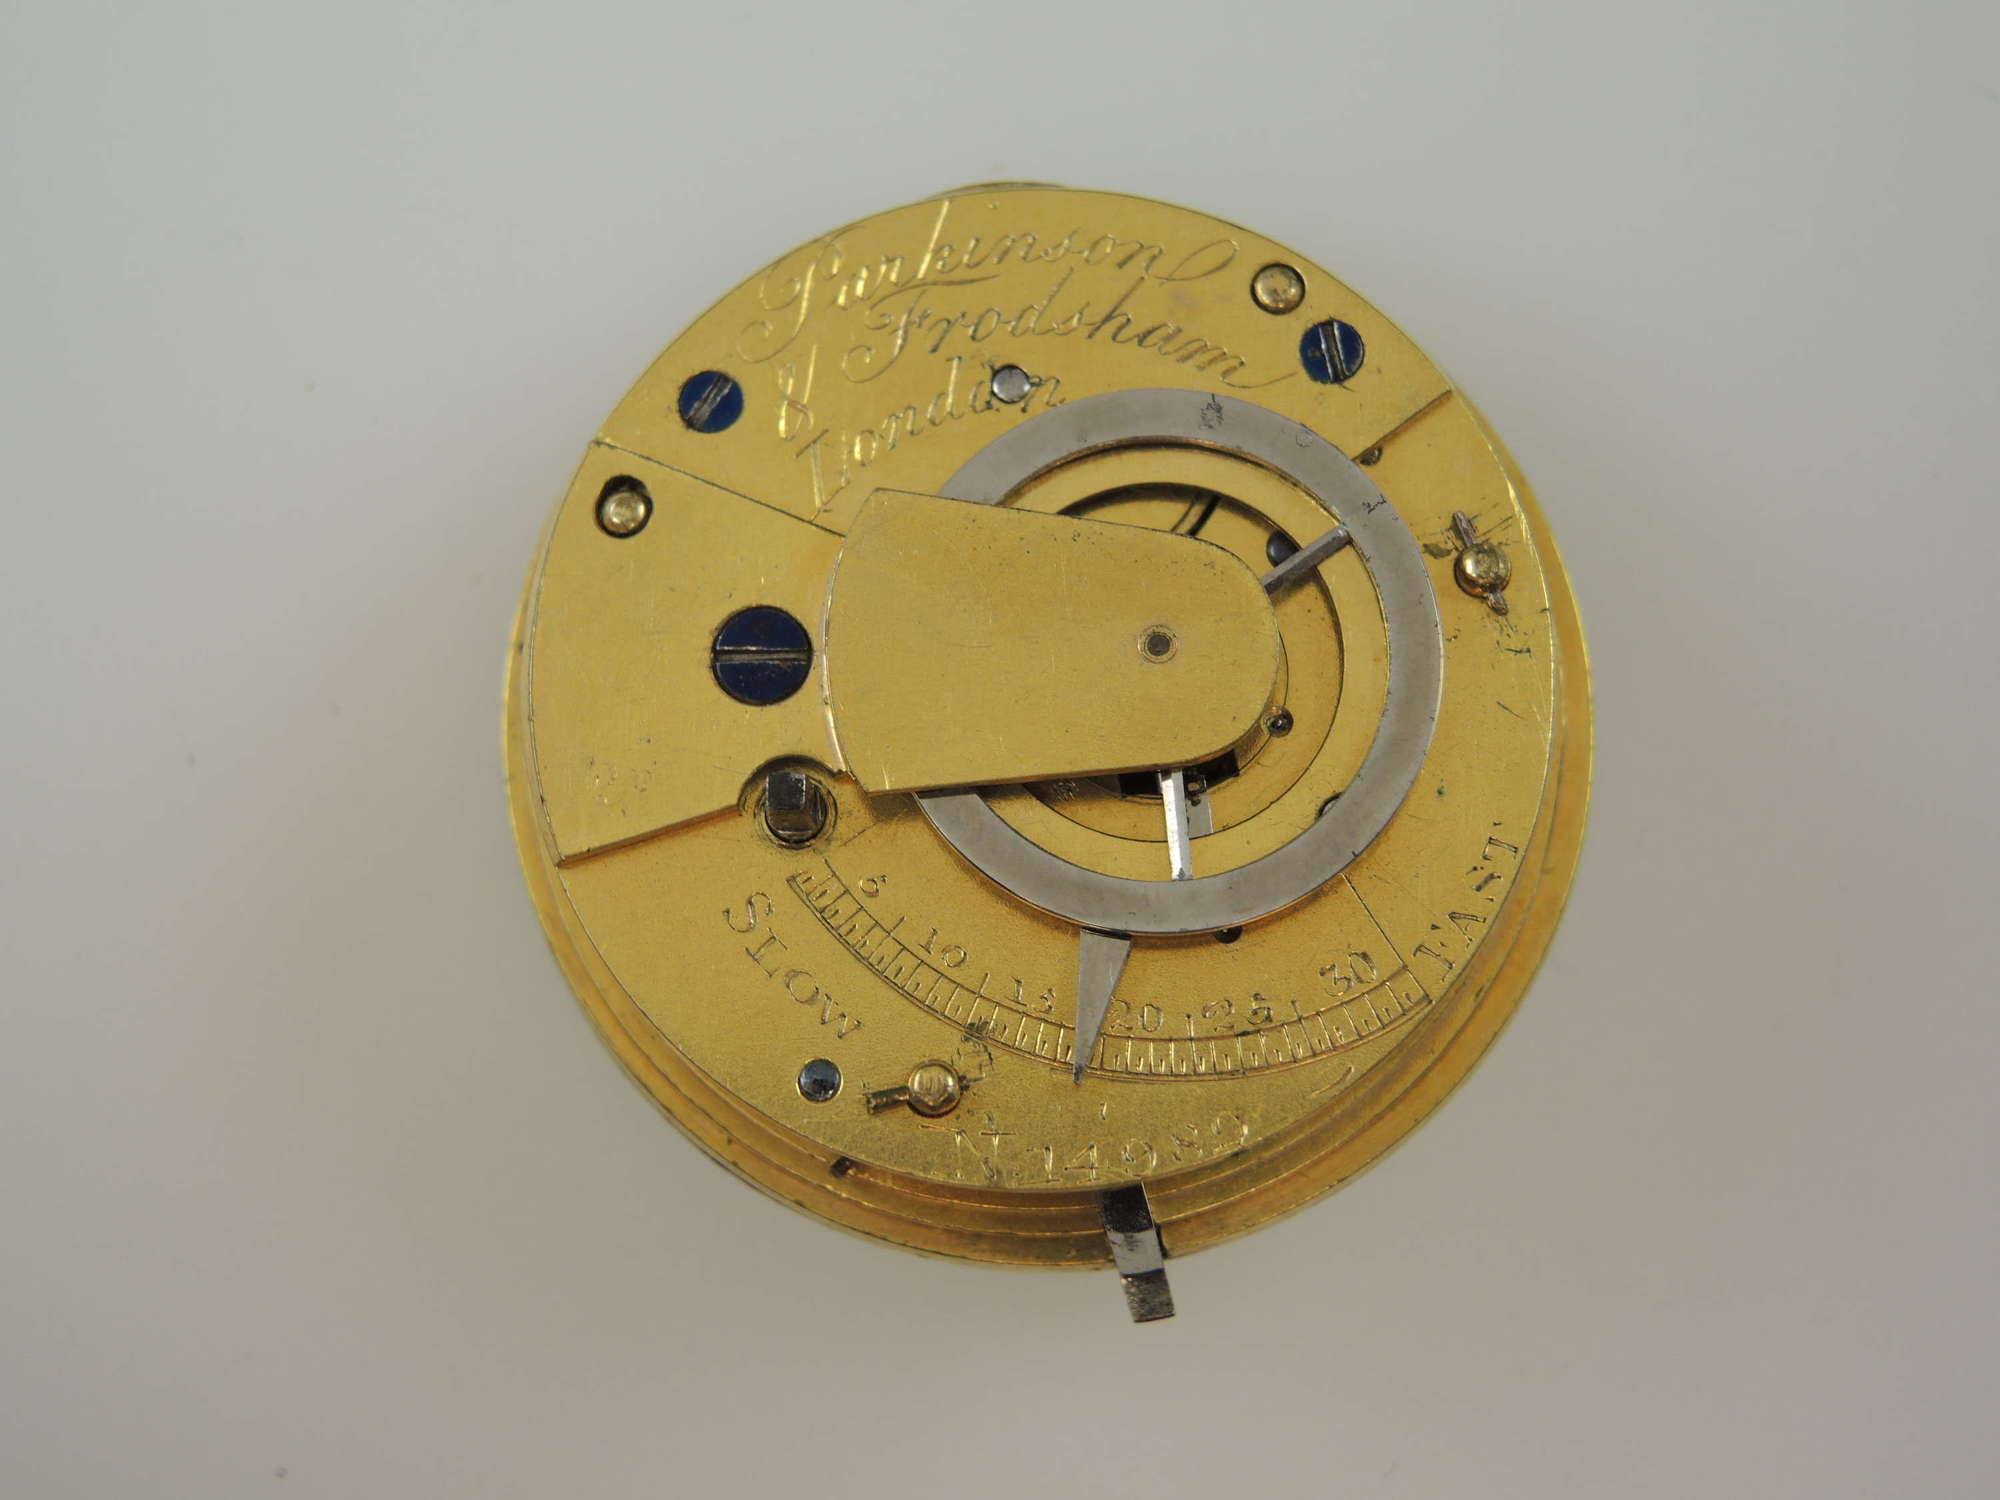 Verge fusee pocket watch movement by Parkinson and Frodsham c1835